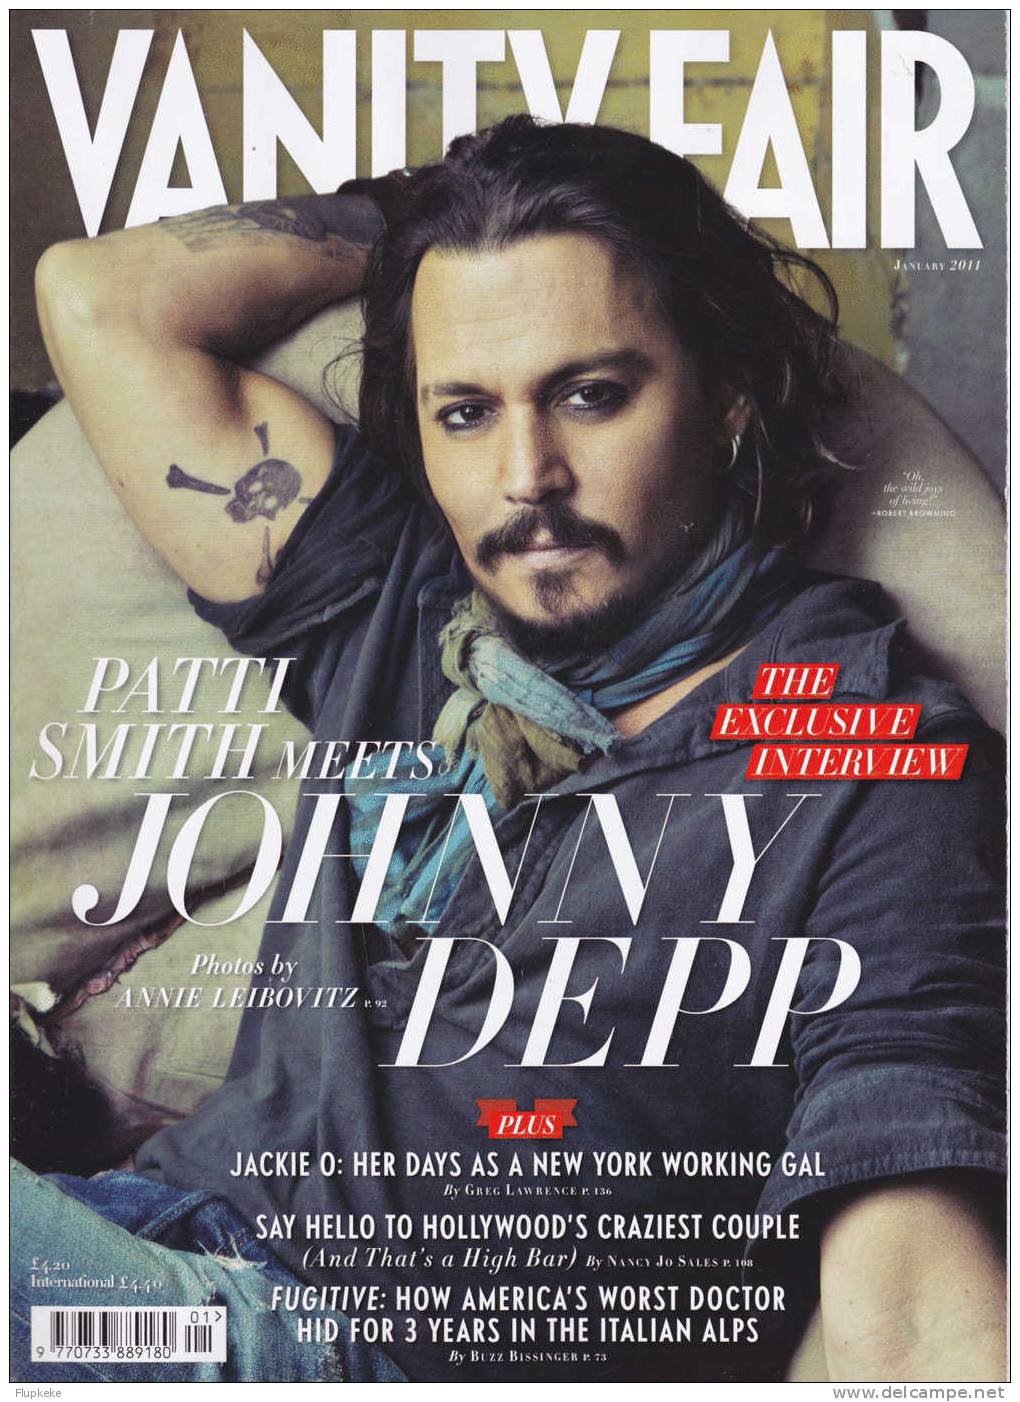 Vanity Fair 605 January 2011 Johnny Depp Photos By Annie Leibovitz The Exclusive Interview - Divertimento